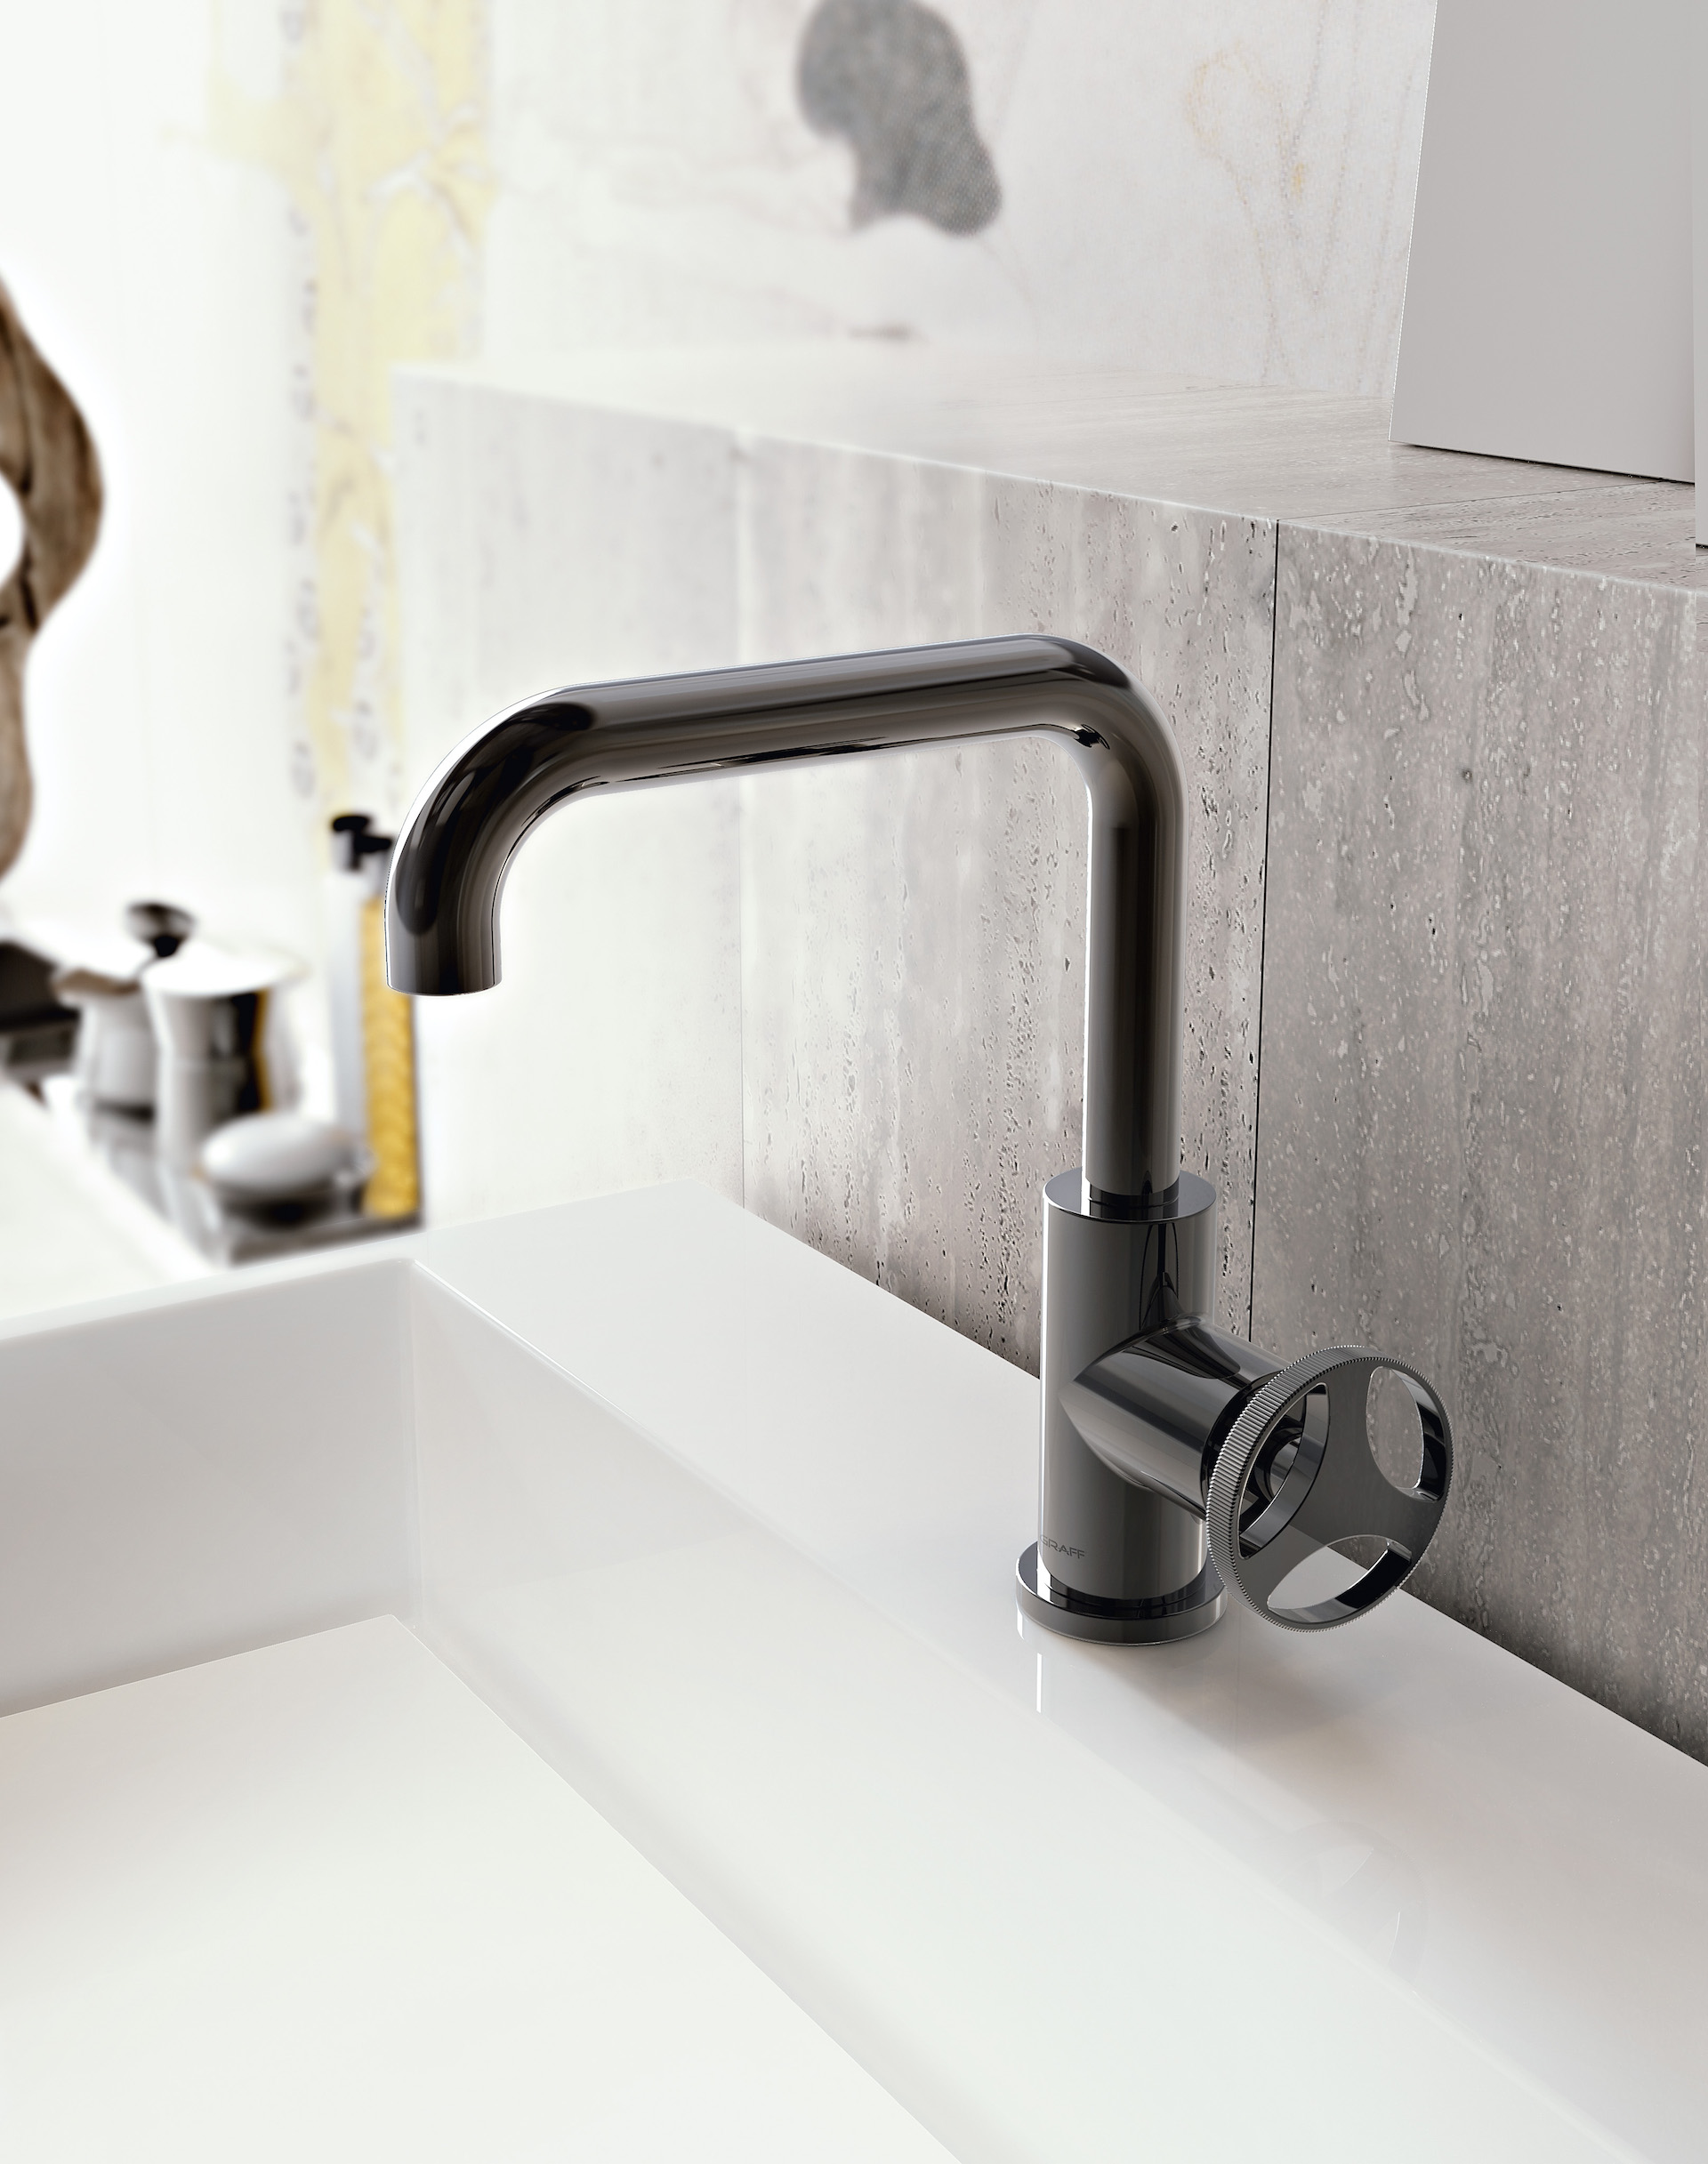 Sink mount Industrial Chic Faucet